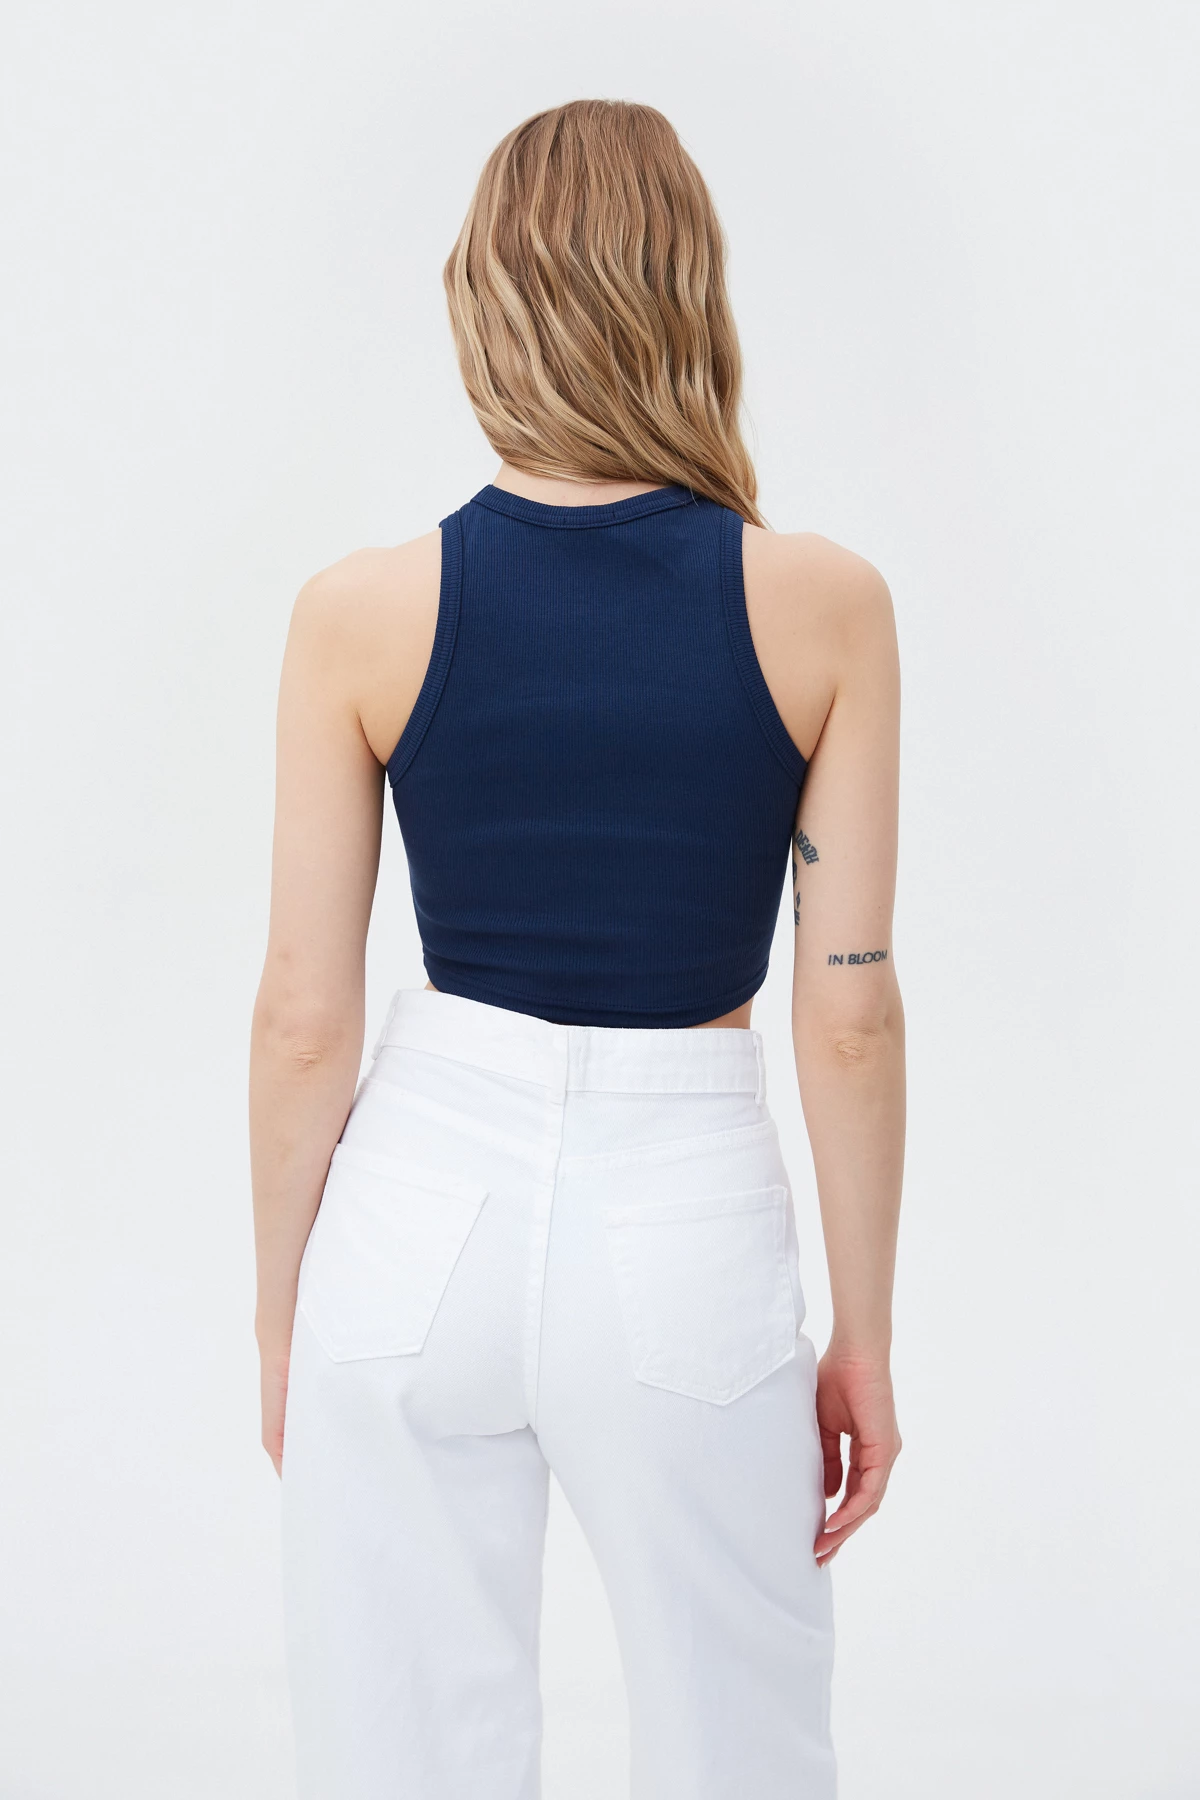 Navy blue cotton crop top with an oval neckline, photo 3